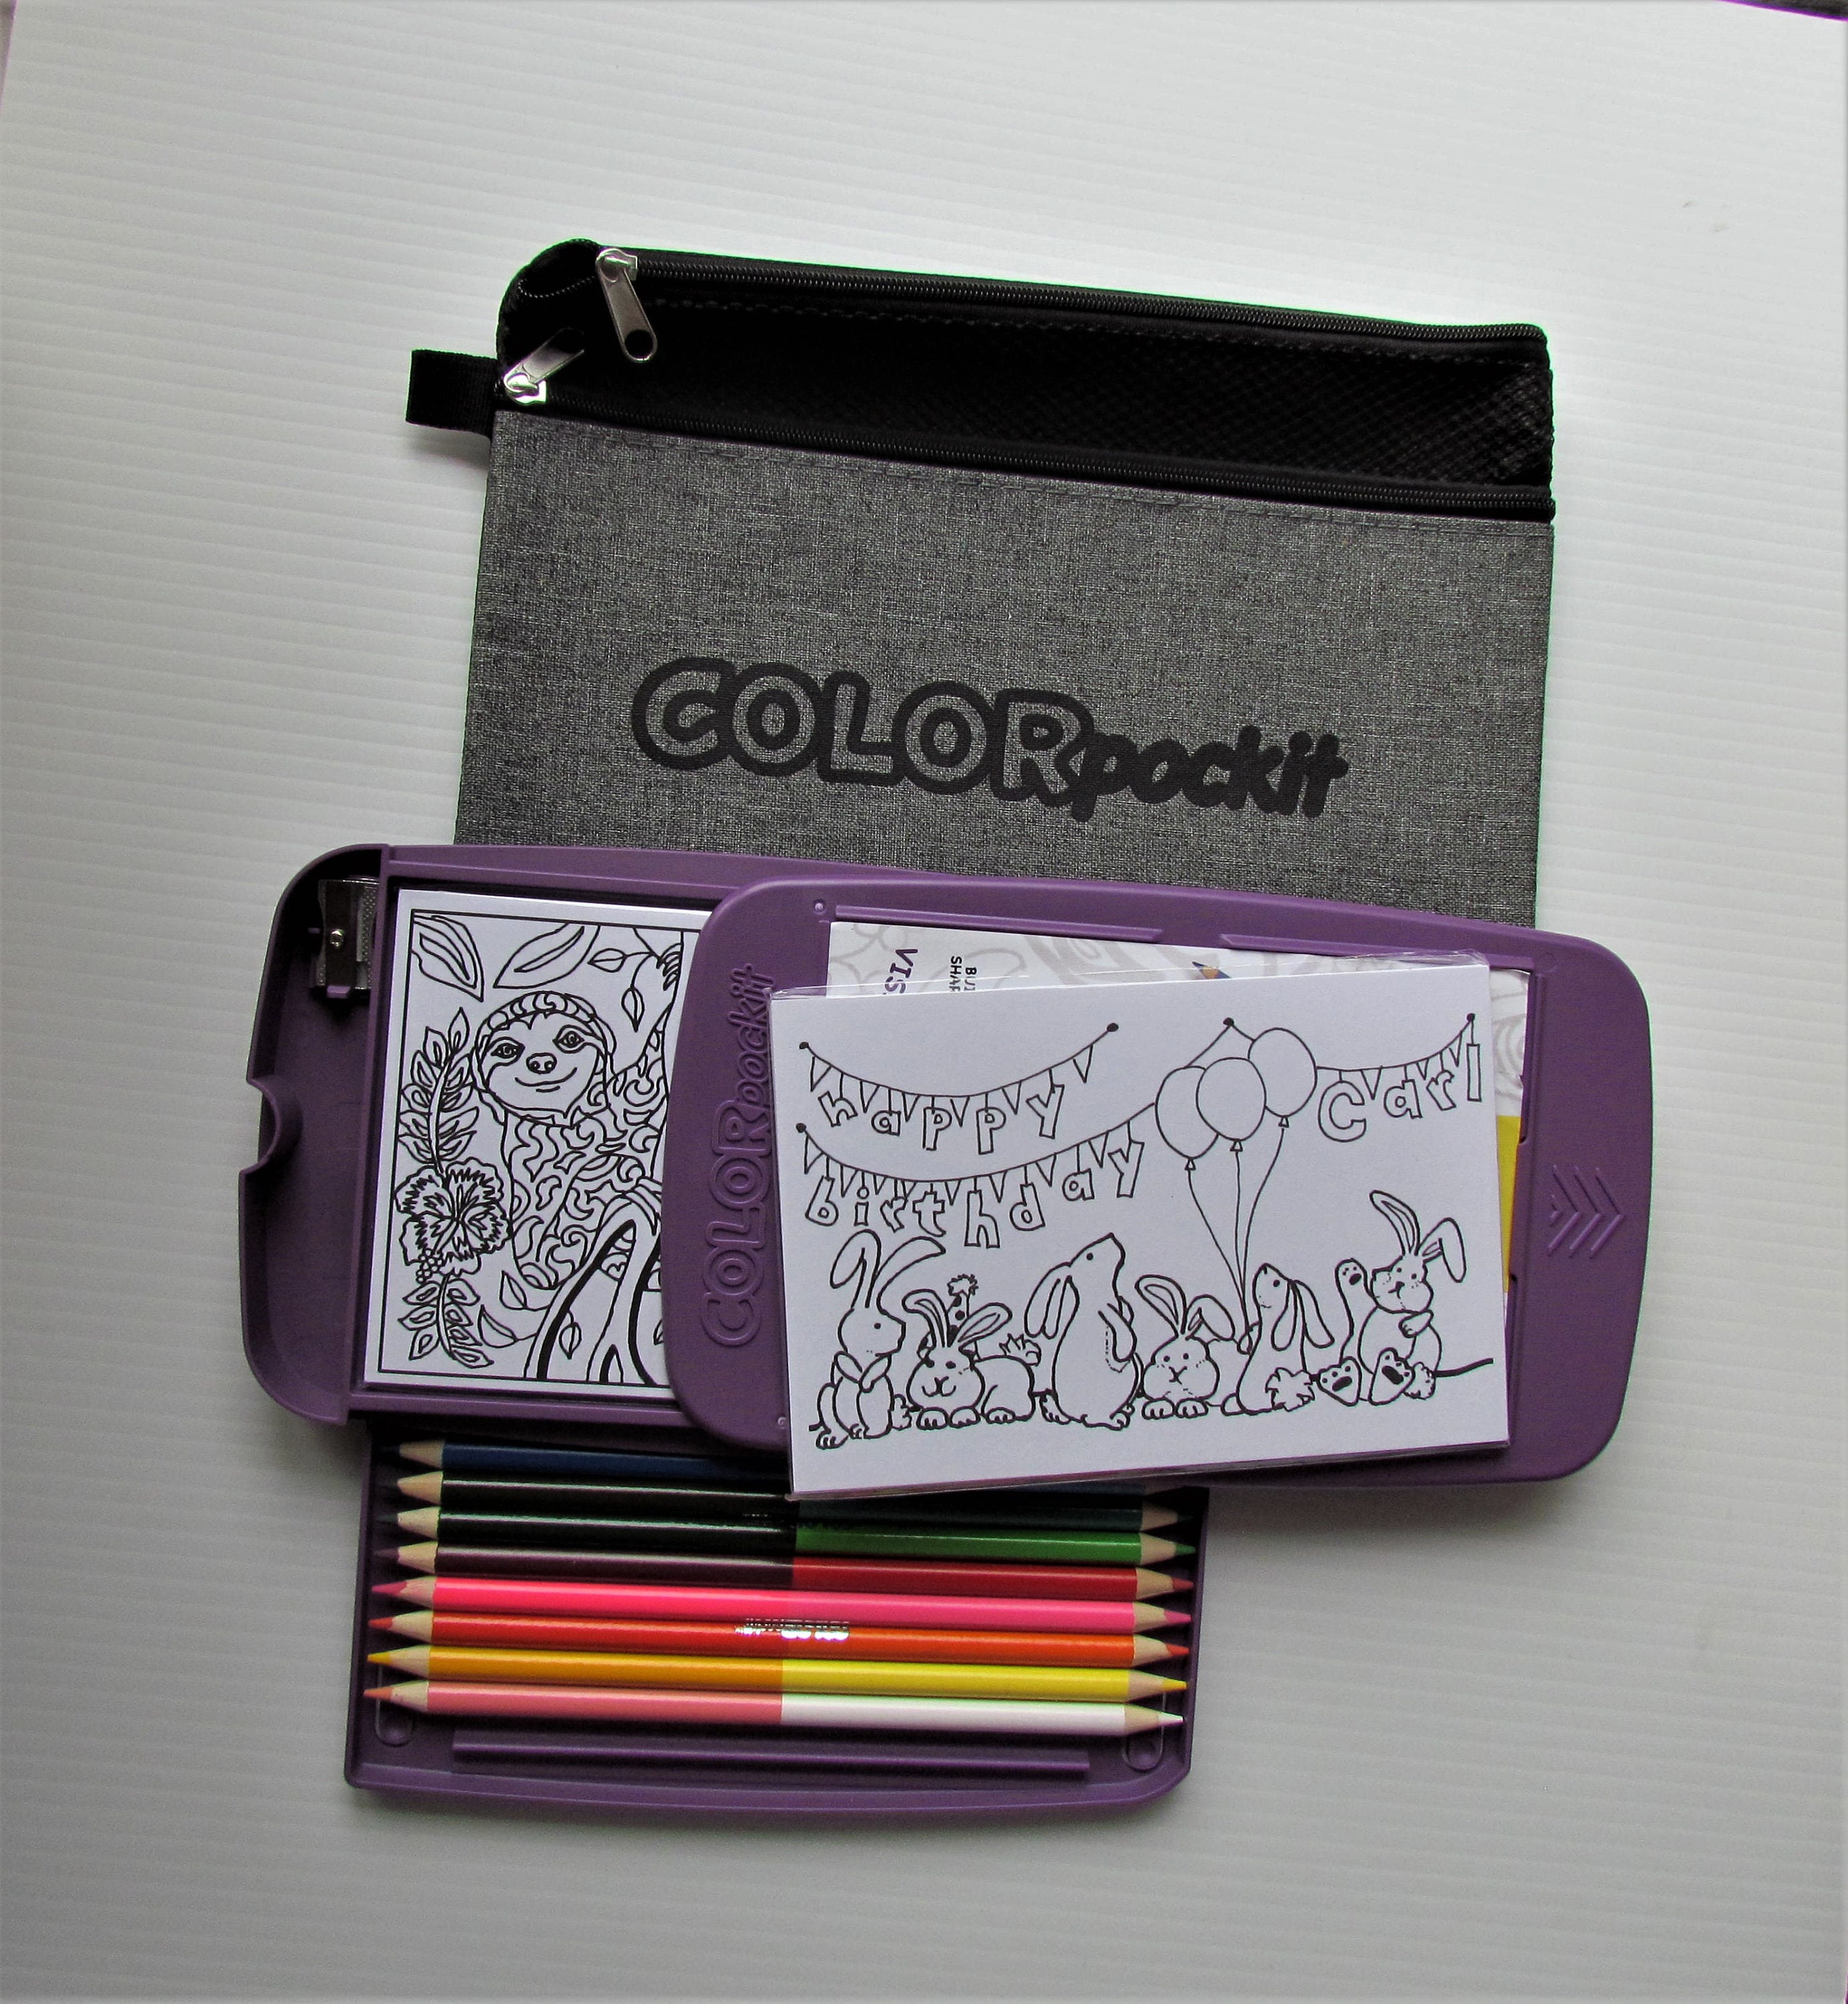  Colorpockit Coloring Kit Travel Art Set with Colored